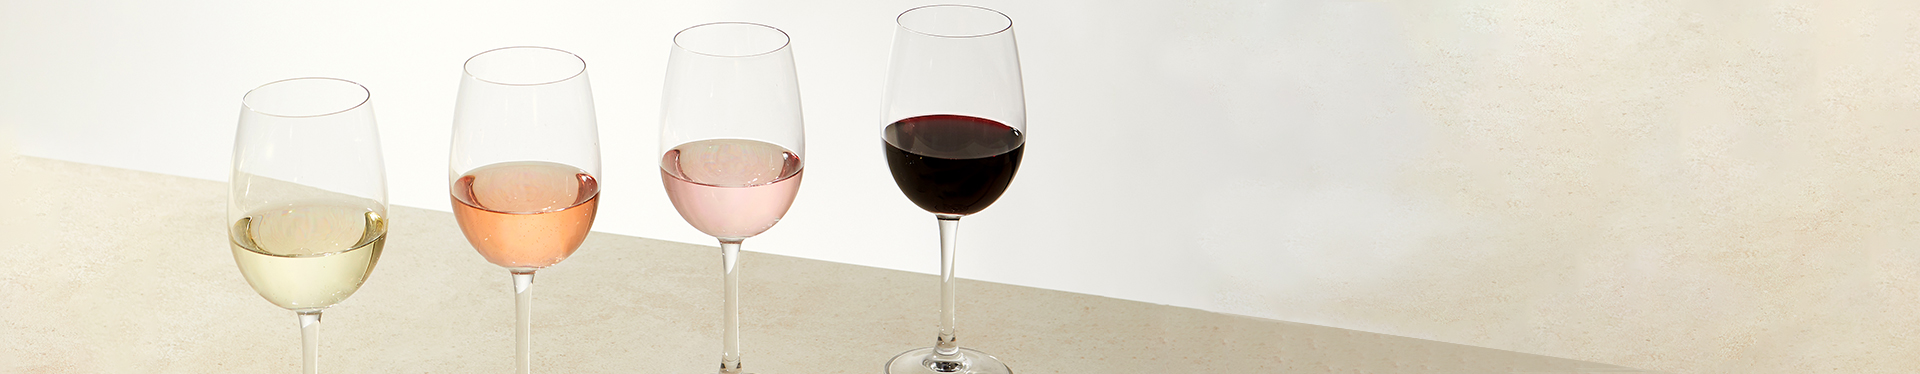 Four glasses of various Tempus Two varietals over a neutral background